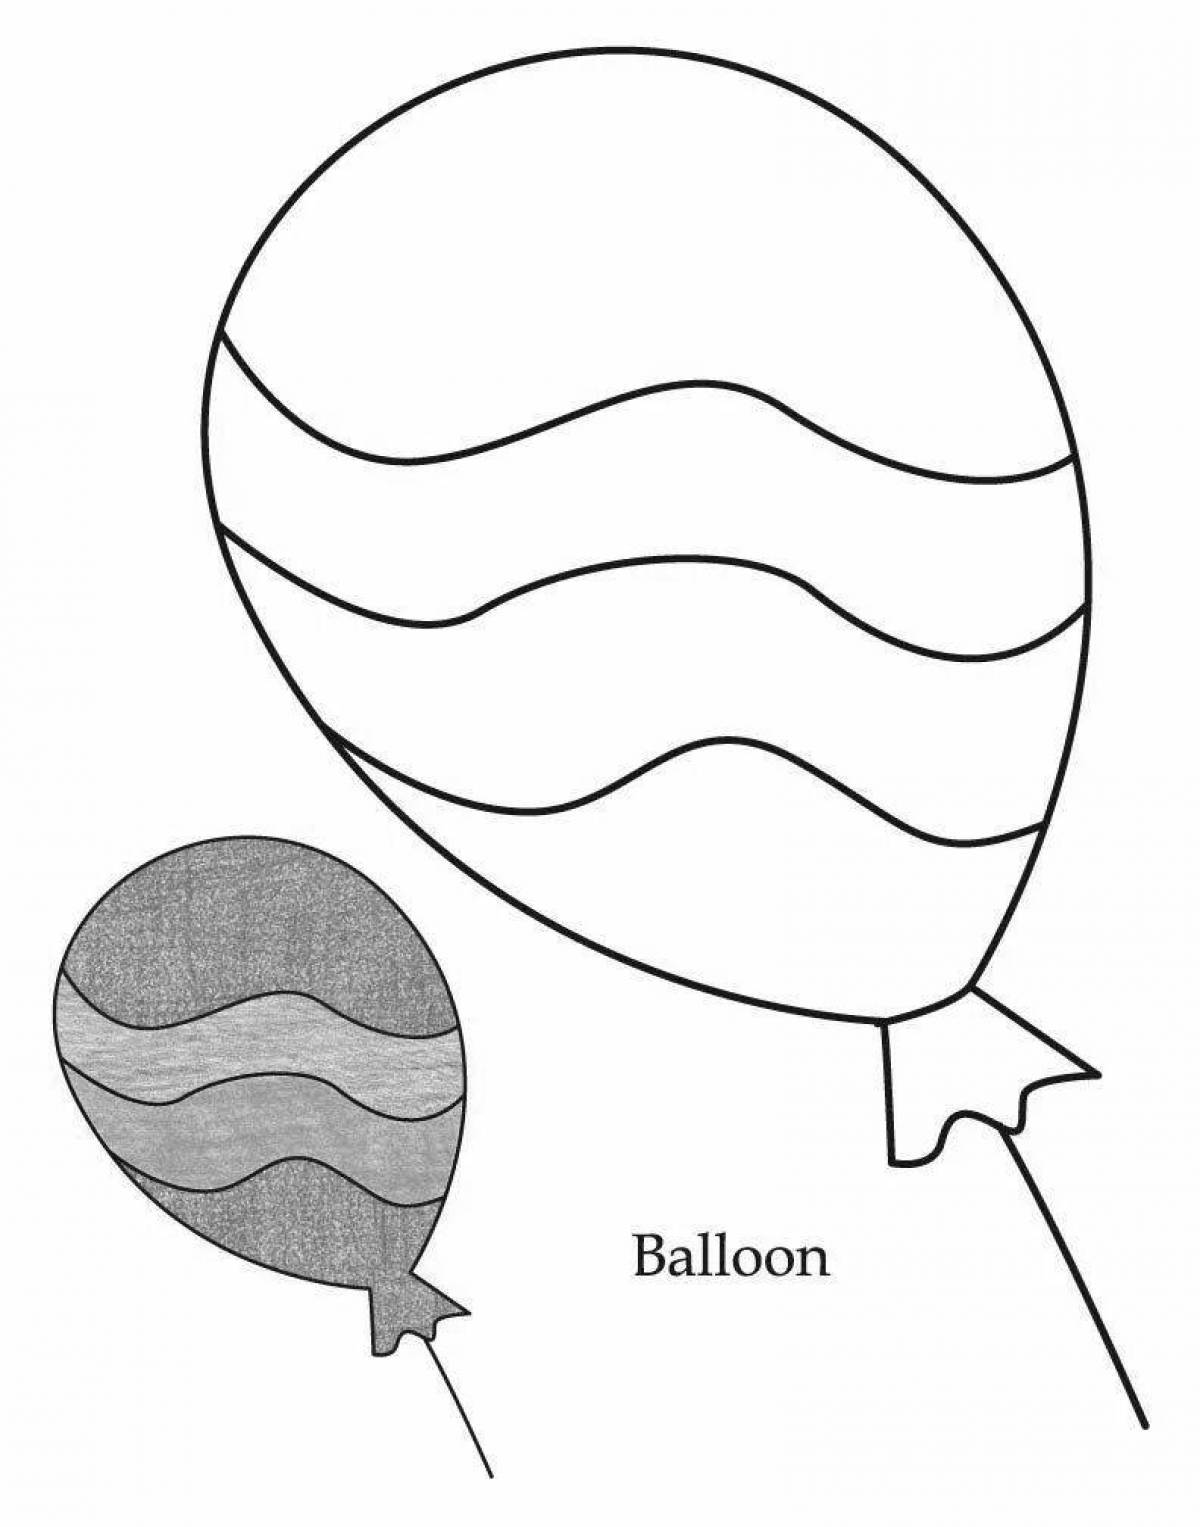 Fun coloring book with balloons for 2-3 year olds